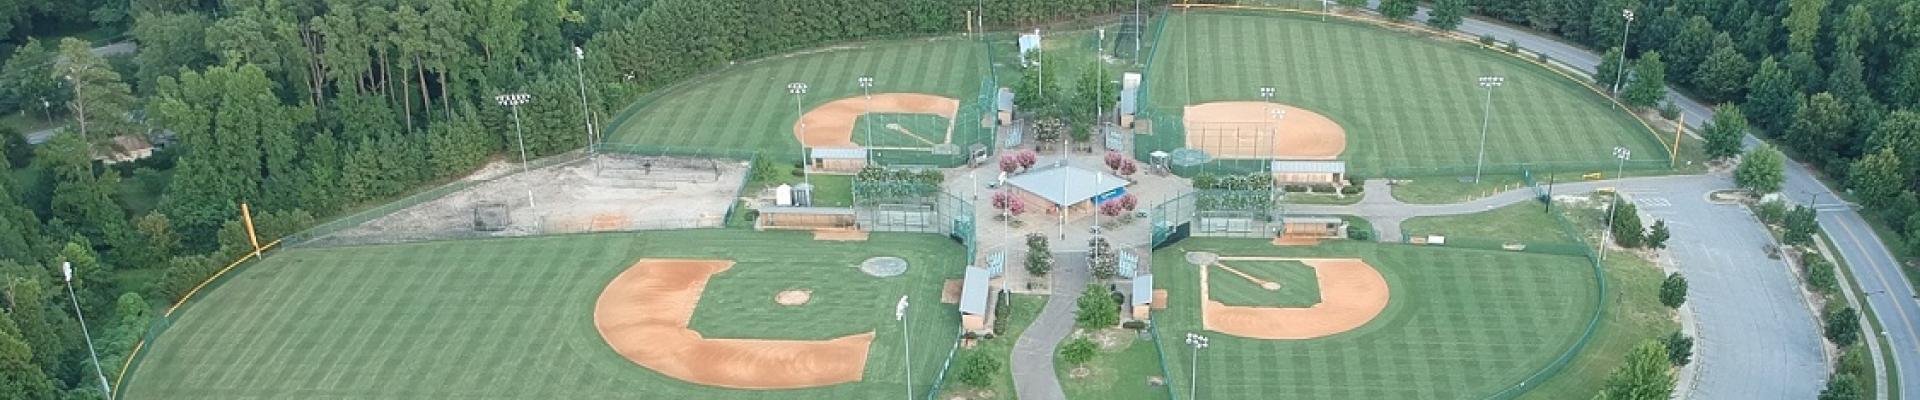 Aerial picture of baseball fields